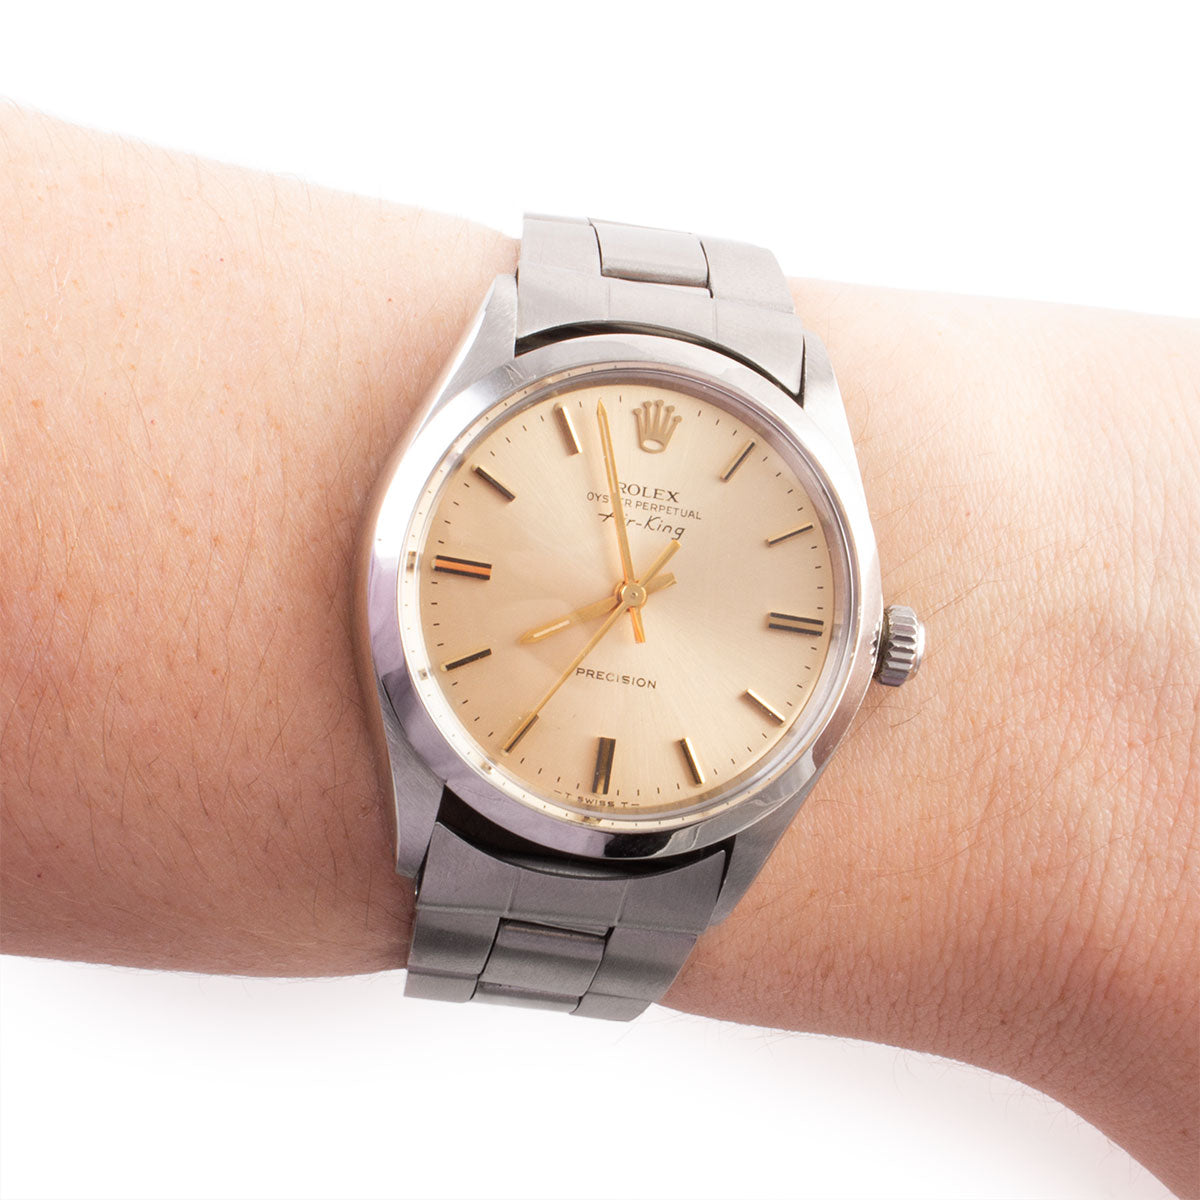 Second-hand watch - Rolex - Air-King Precision - 4700€